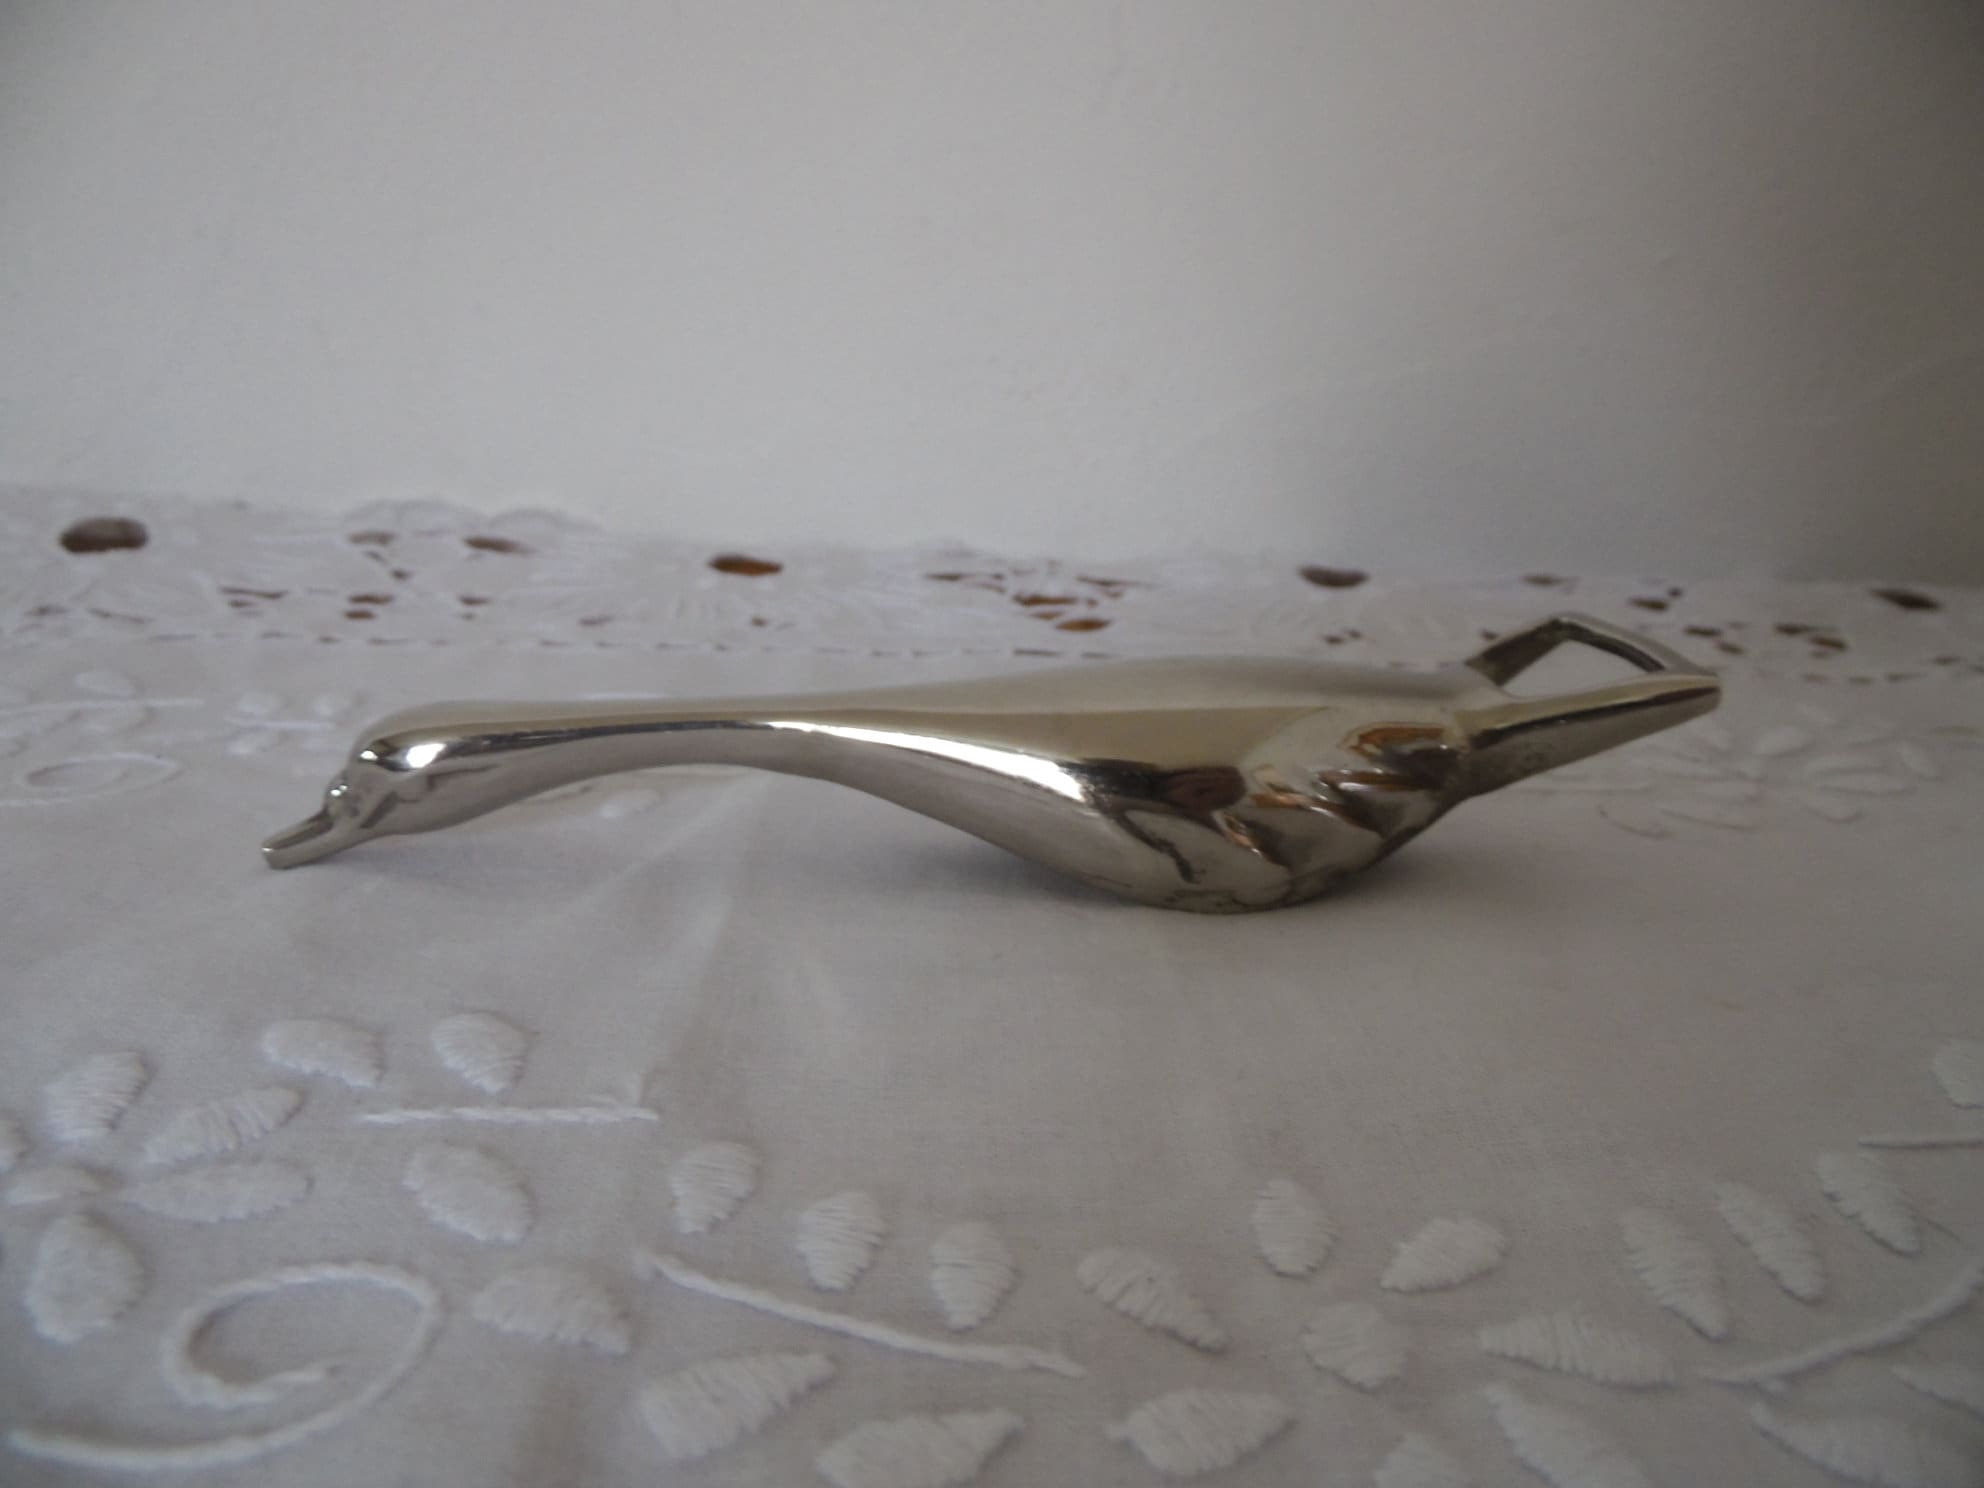 Ouvre Bouteille , Décapsuleur Zoomorphe Forme Oie Vintage 60's, Made in W Germany, Deco Bar, Vintage